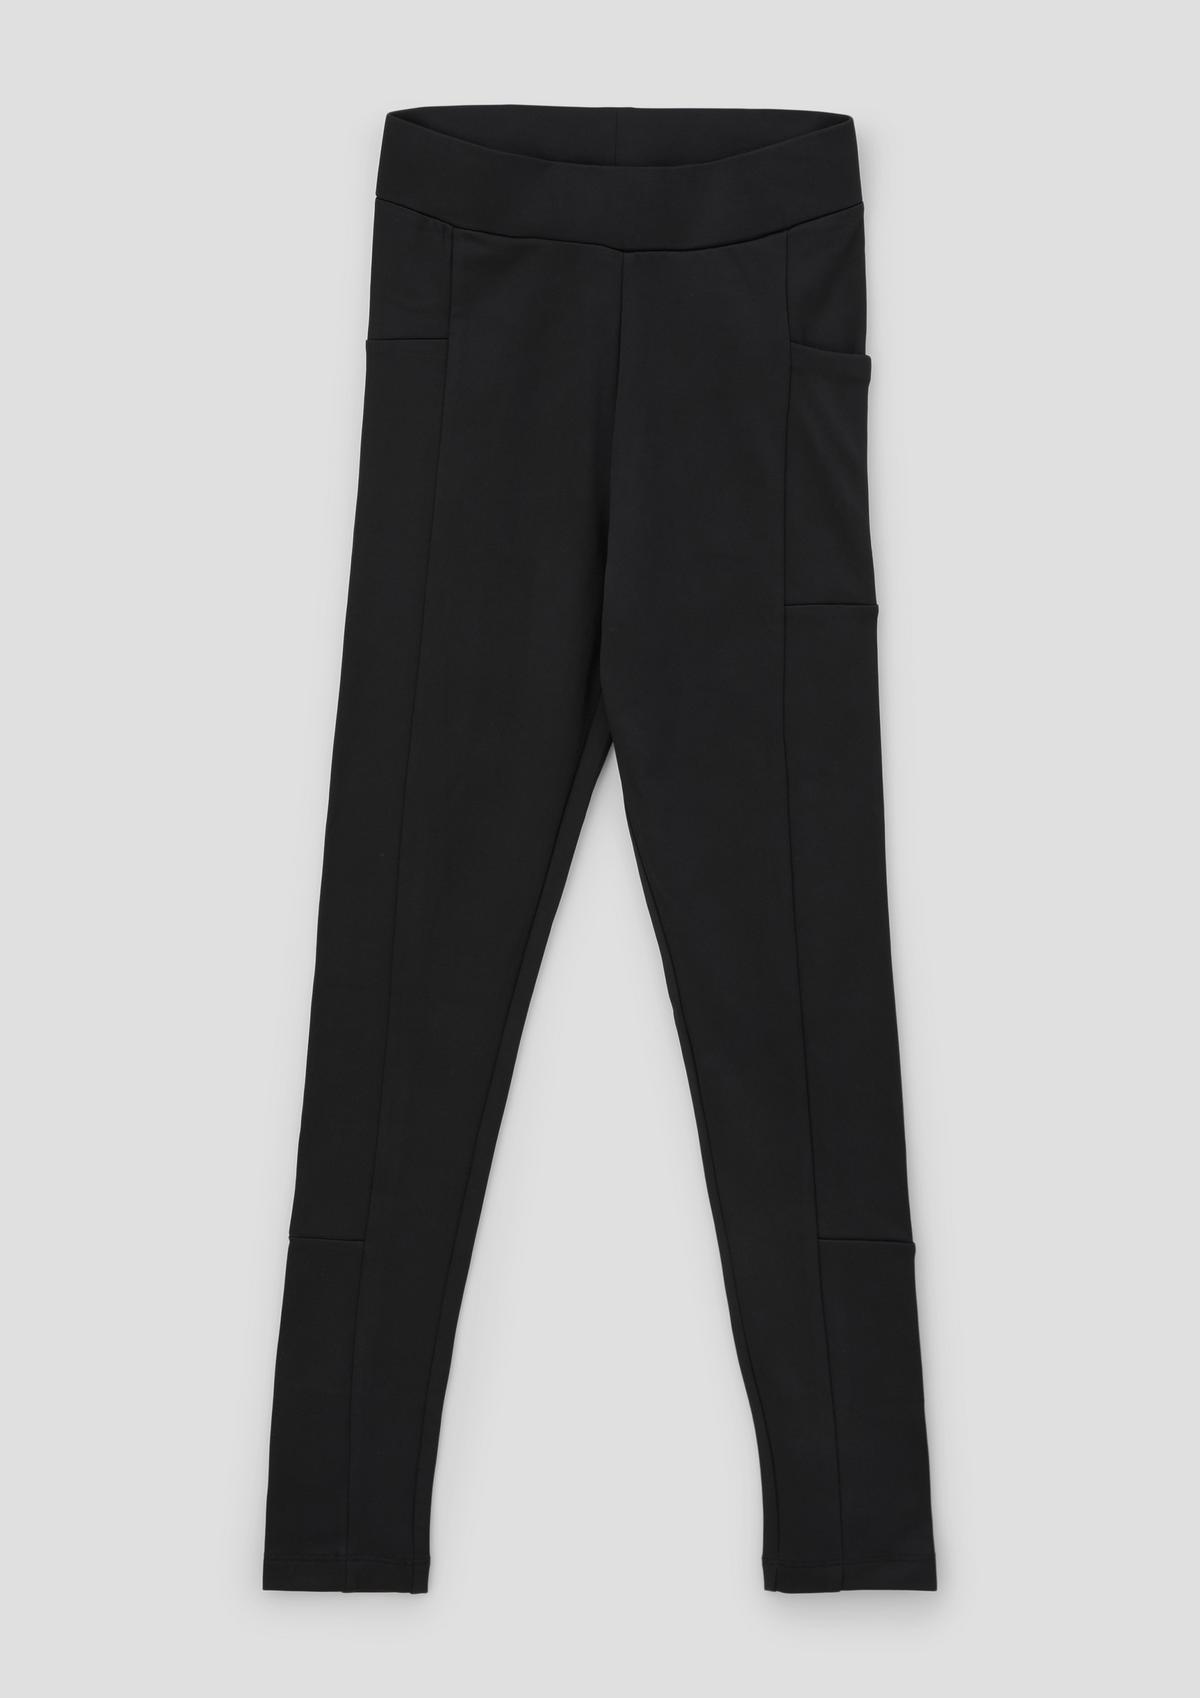 s.Oliver Slim fit: Interlock jersey trousers